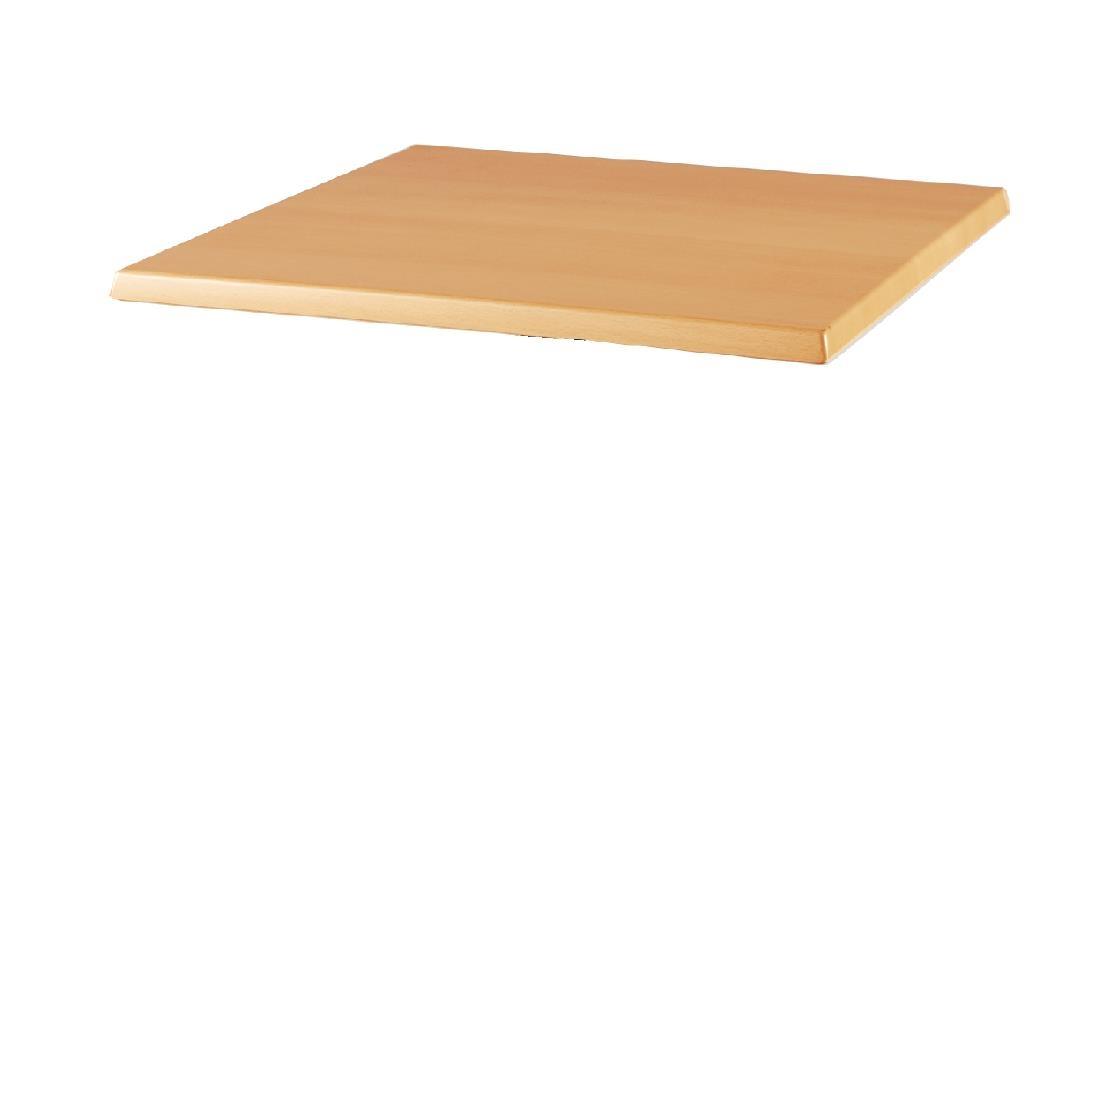 Werzalit Pre-drilled Square Table Top  Planked Beech 800mm - GR504  - 2